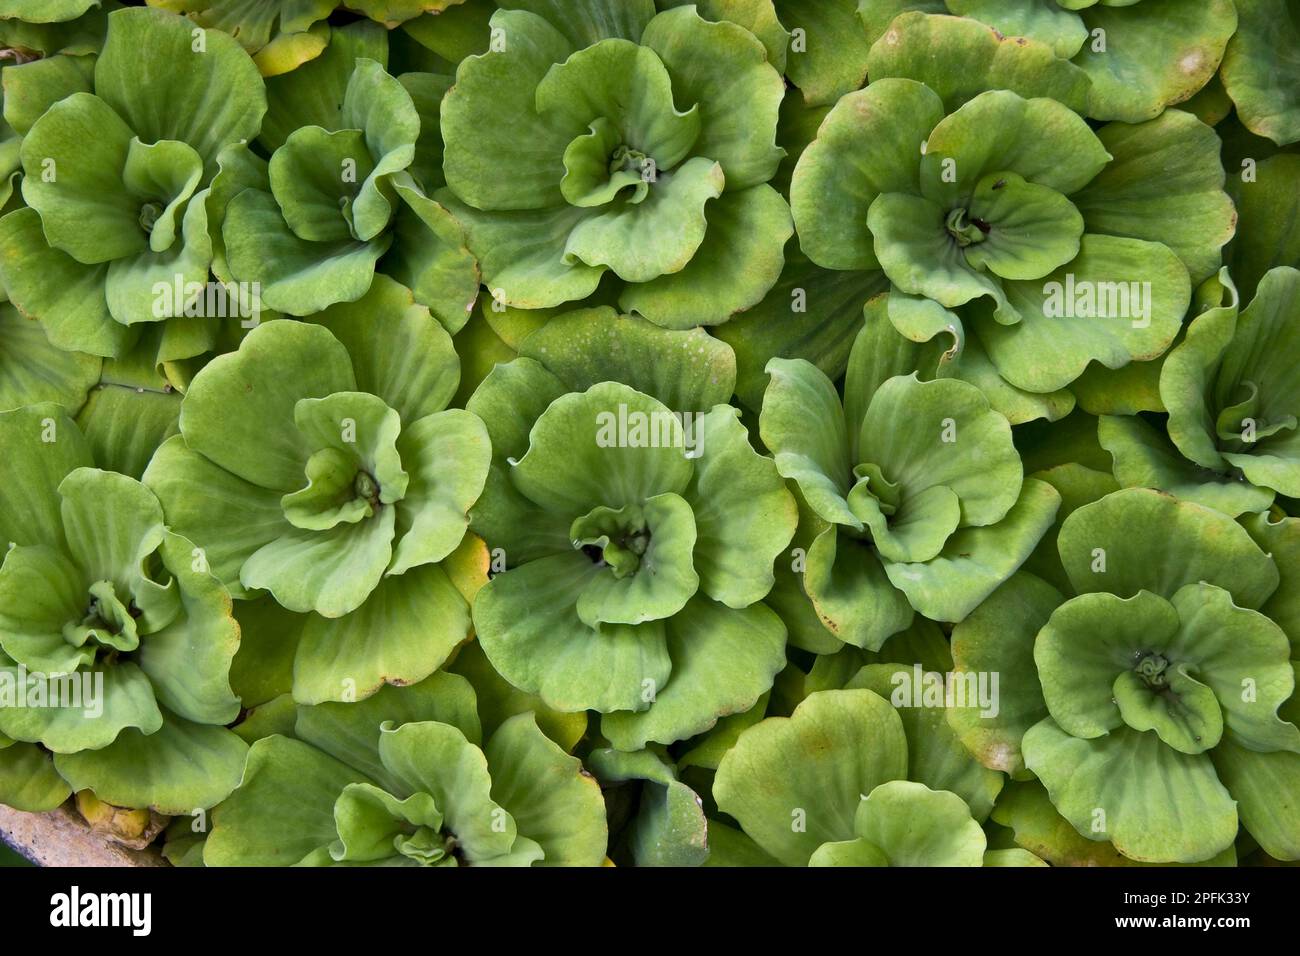 Water lettuce, water cabbage (Pistia stratiotes), Mussel flower, Aquatic plants, Arum family, Water lettuce close-up of leaves, on pond, Palawan Stock Photo